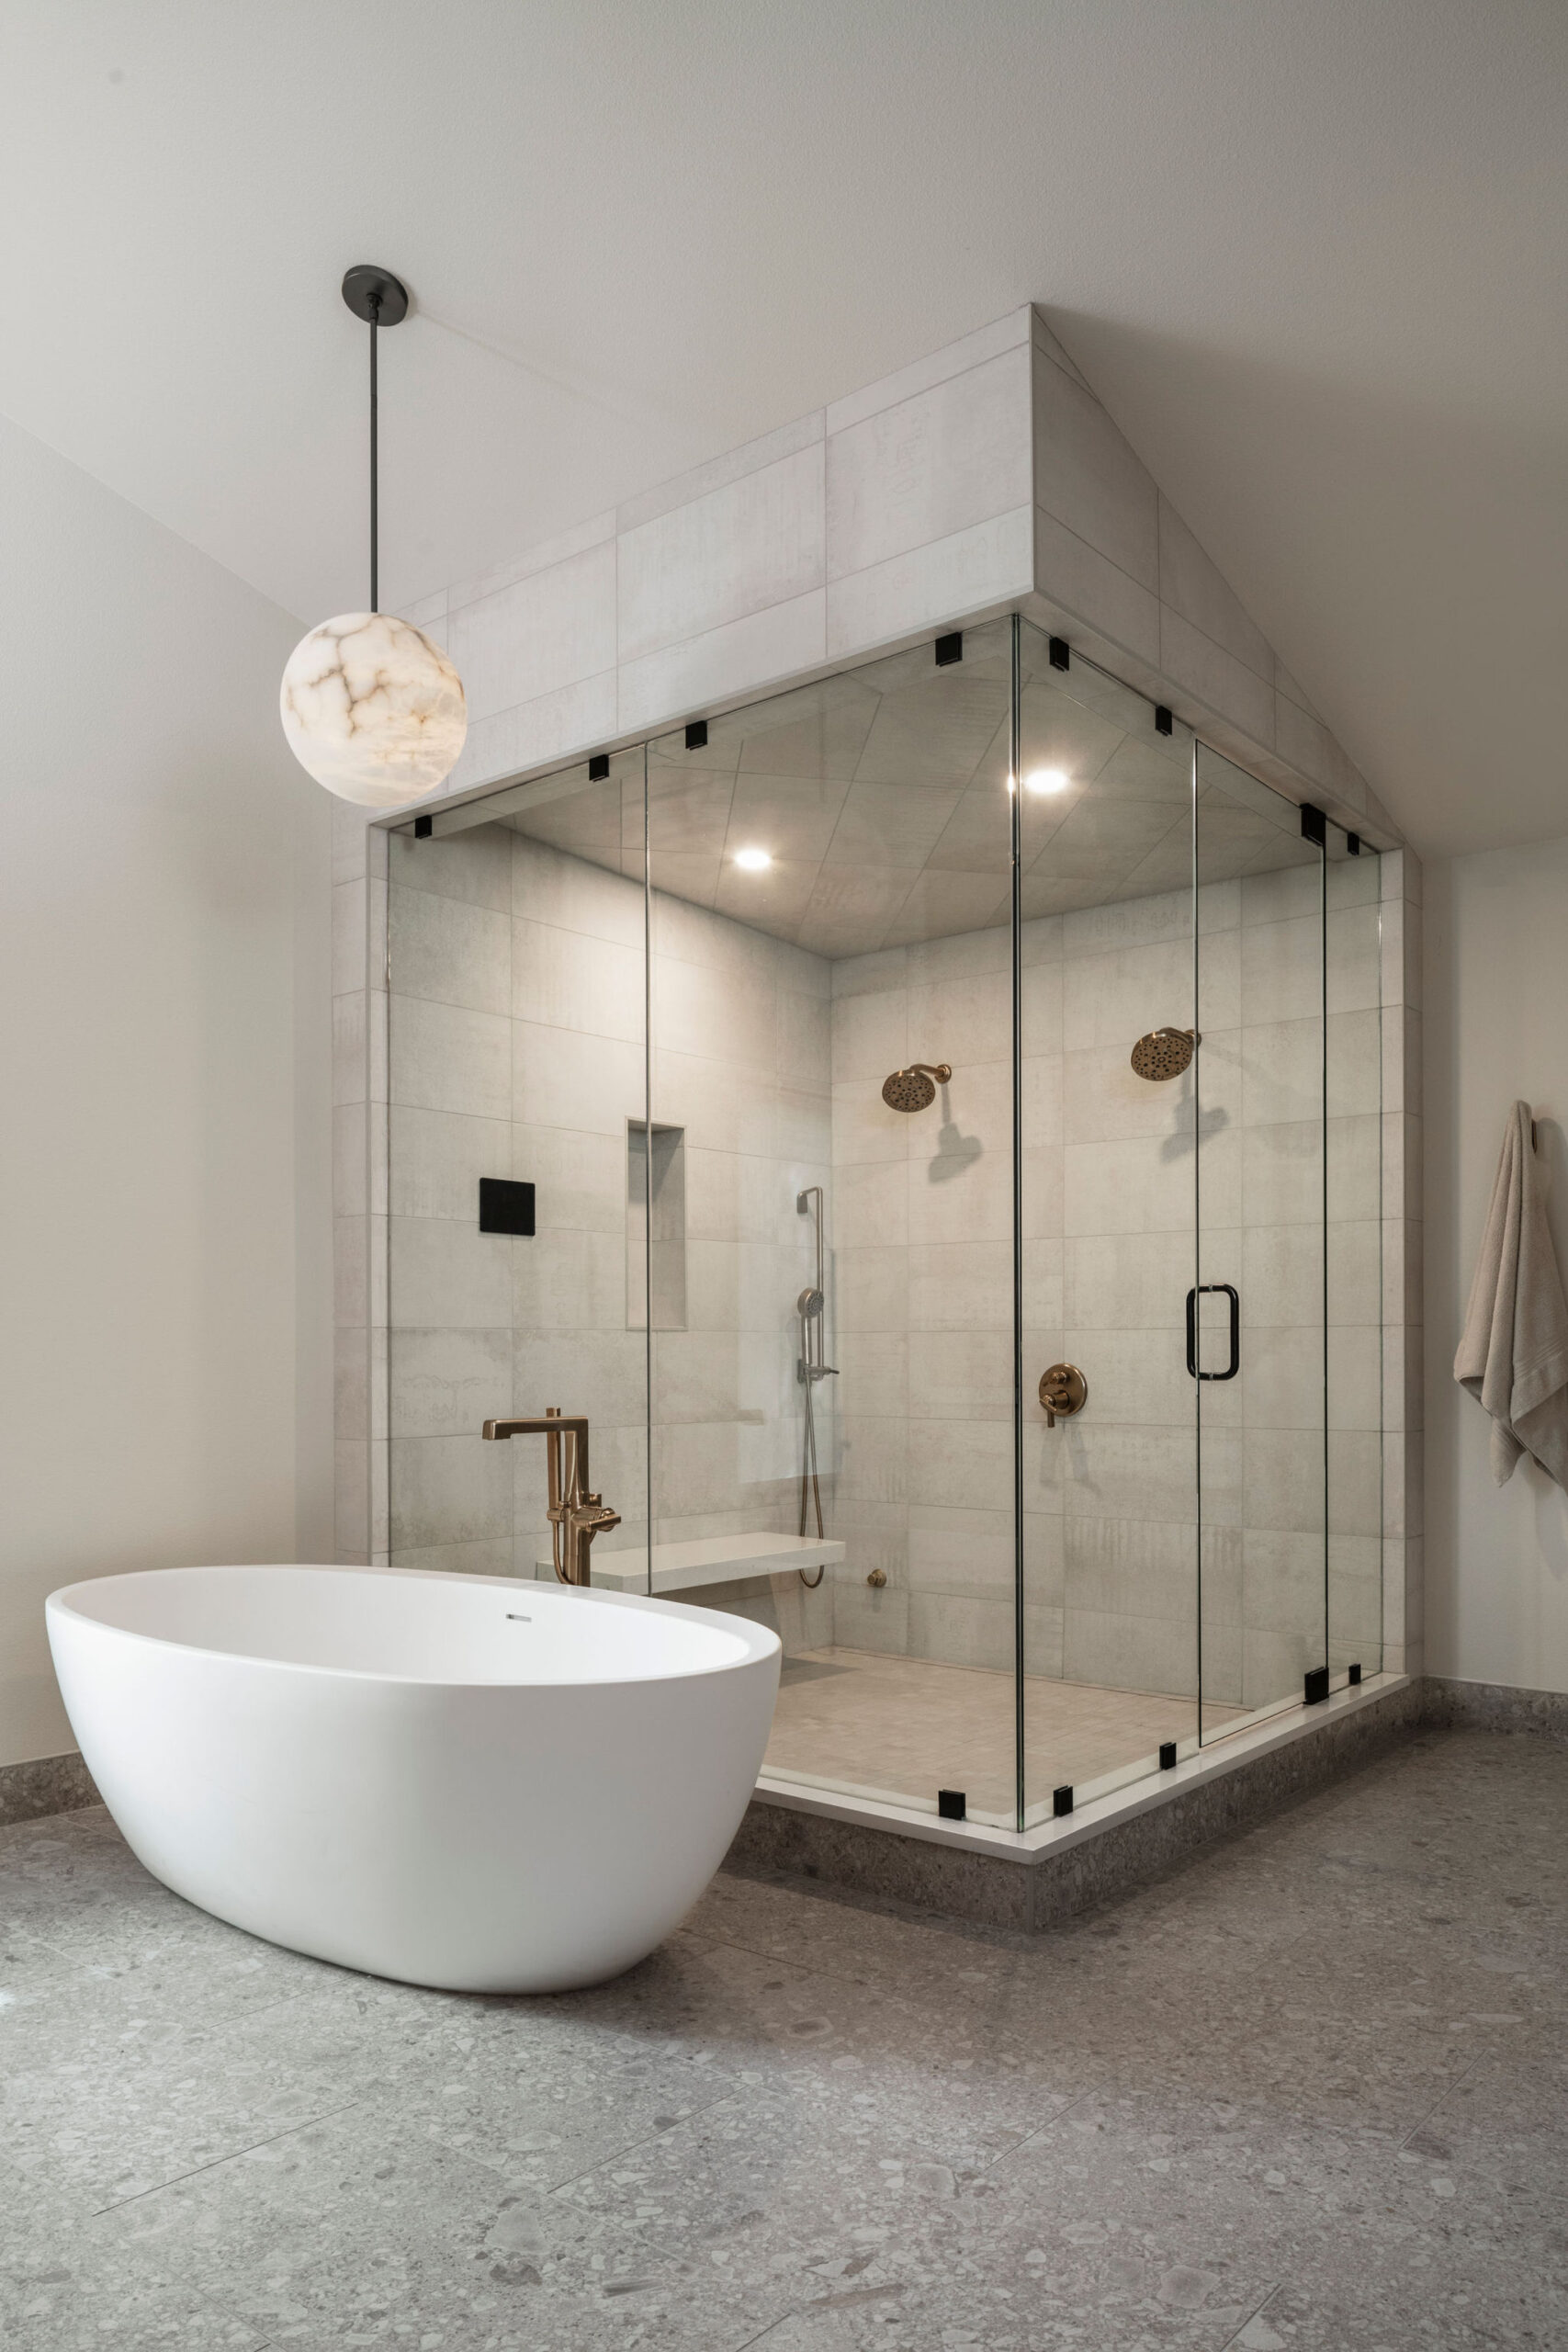 Wildflower custom home - master bath with Japanese soaker tub, double glassed-in shower